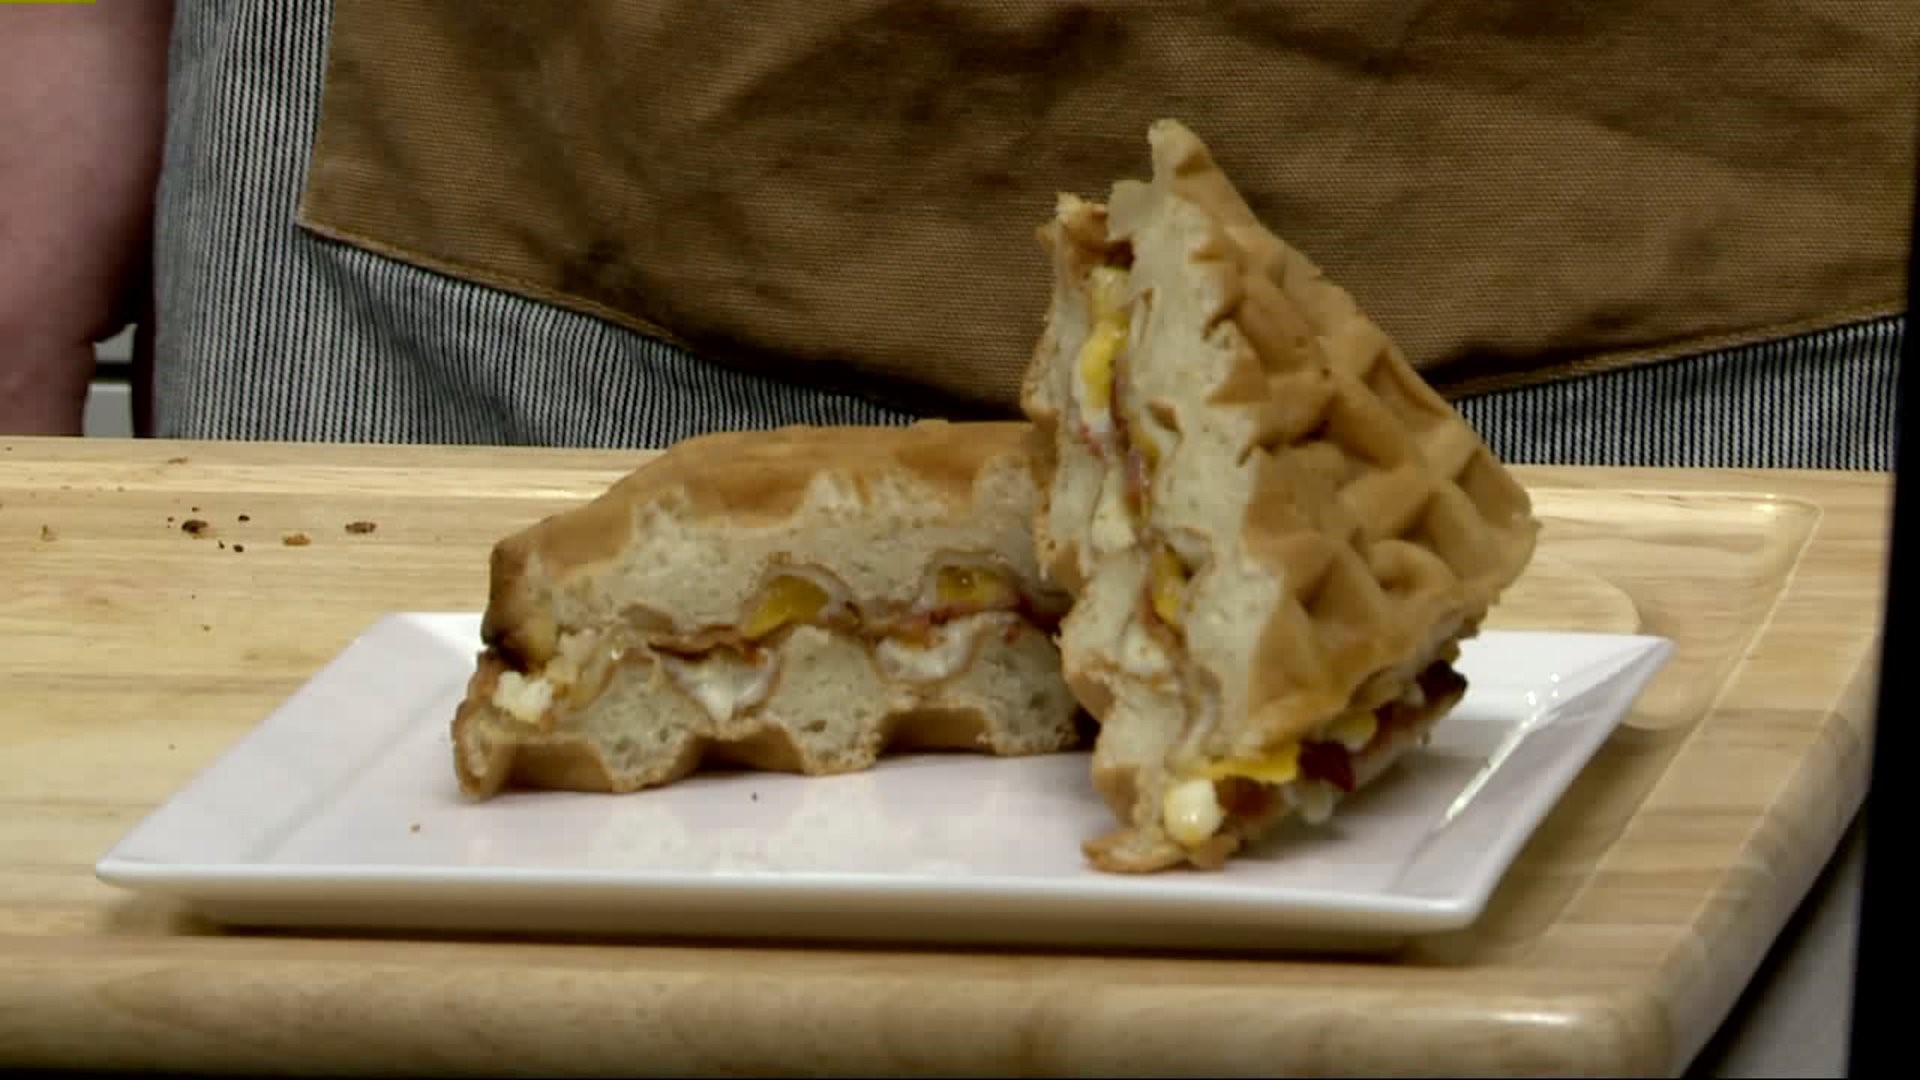 Taste Test Pop Up Restaurant cooks up specialty grilled cheese